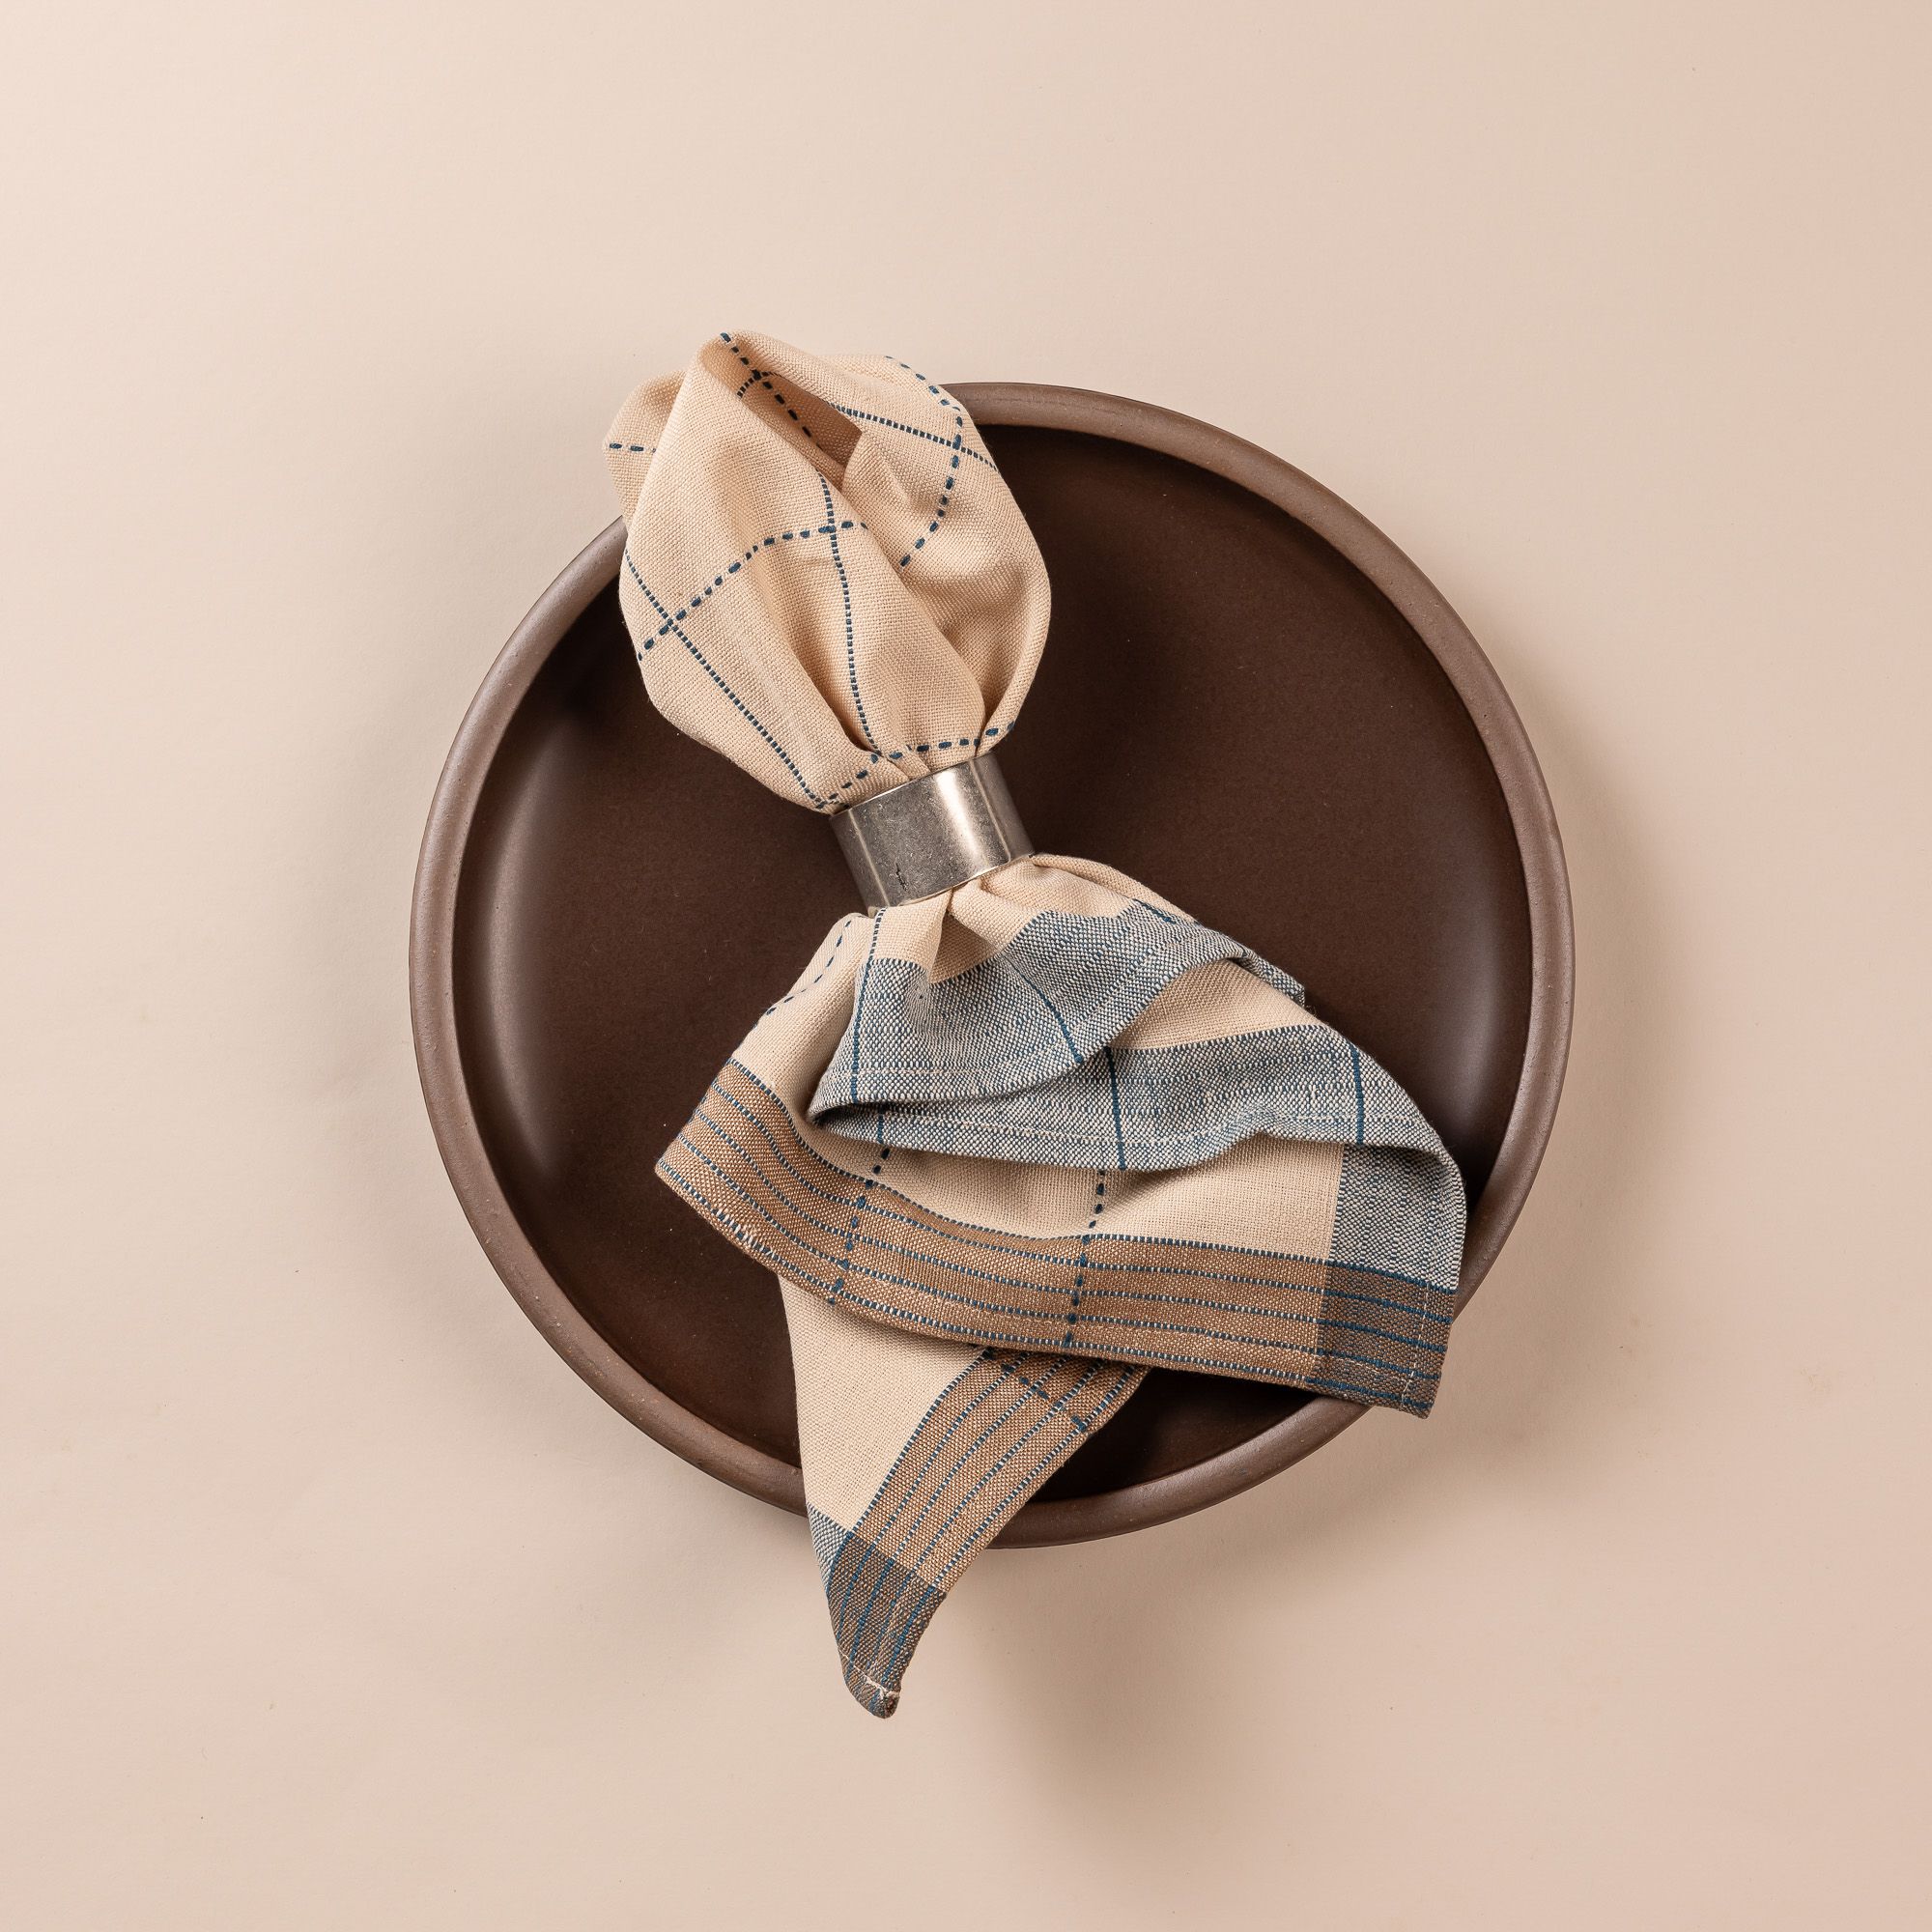 A natural folded napkin pulled through a pewter napkin ring sits on a deep brown dinner plate. The napkin is designed with turquoise gridlines with light blue and tan striped edging.